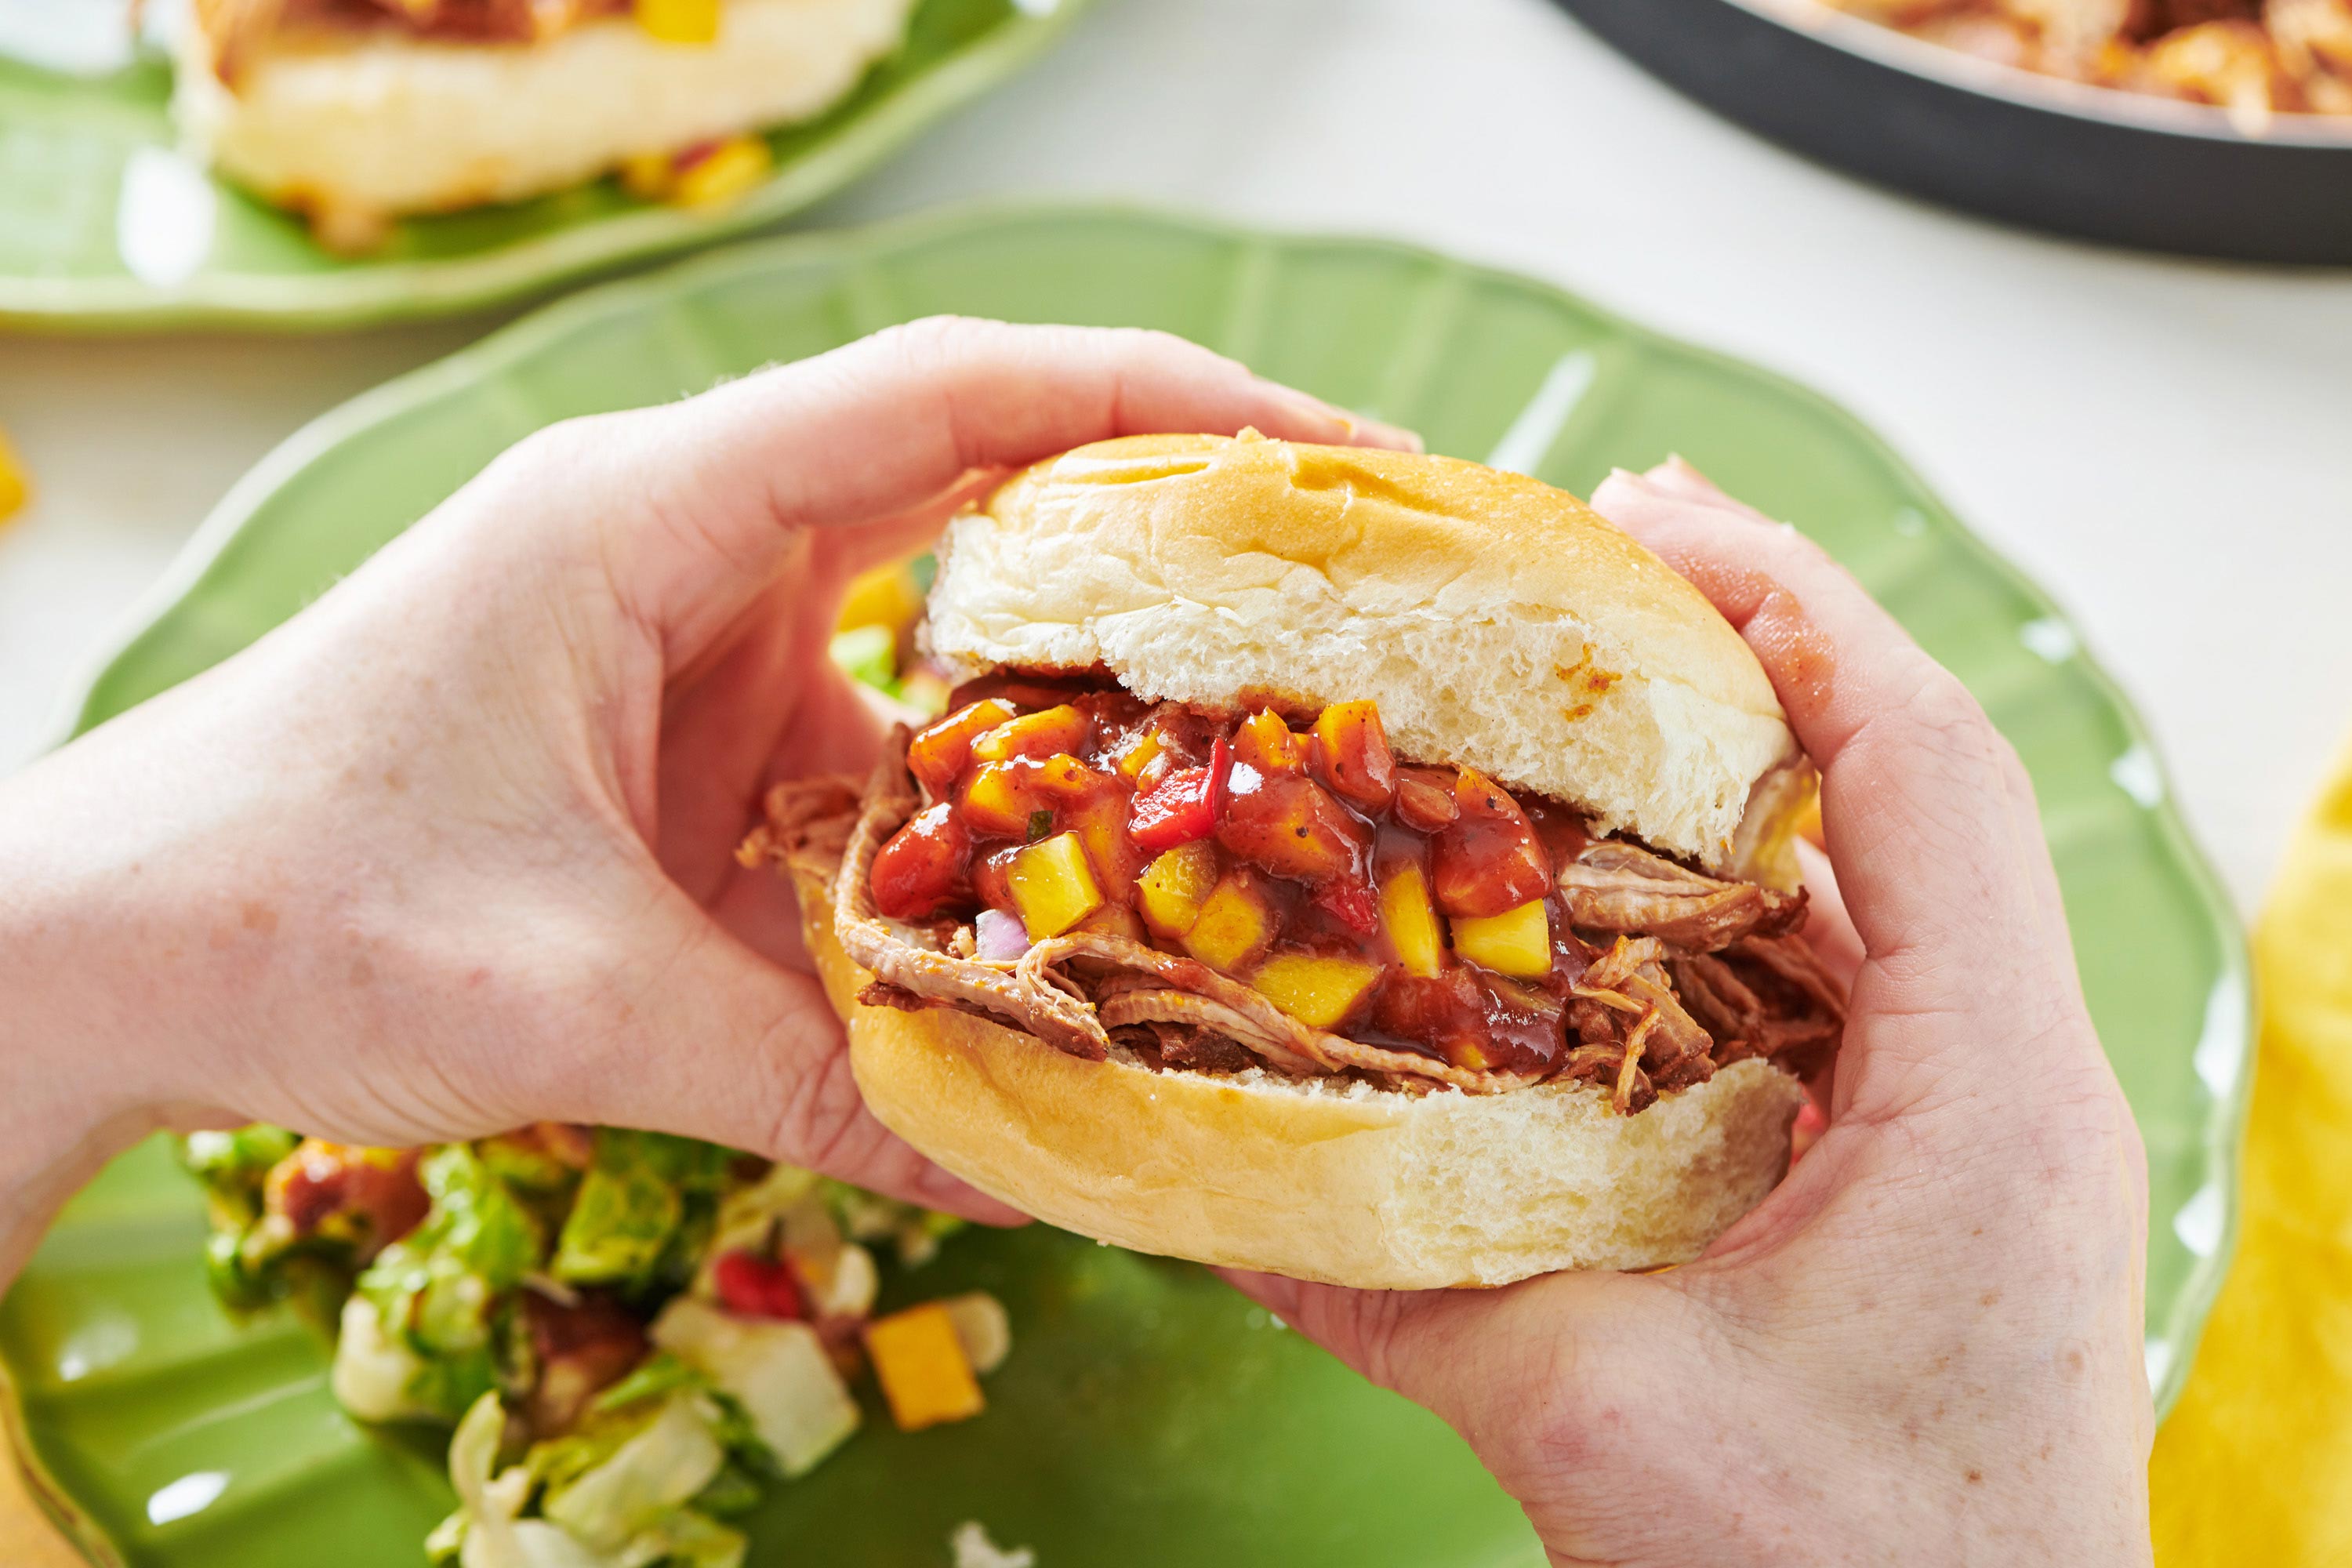 Woman holding Slow Cooker Barbecue Pulled Pork sandwich.